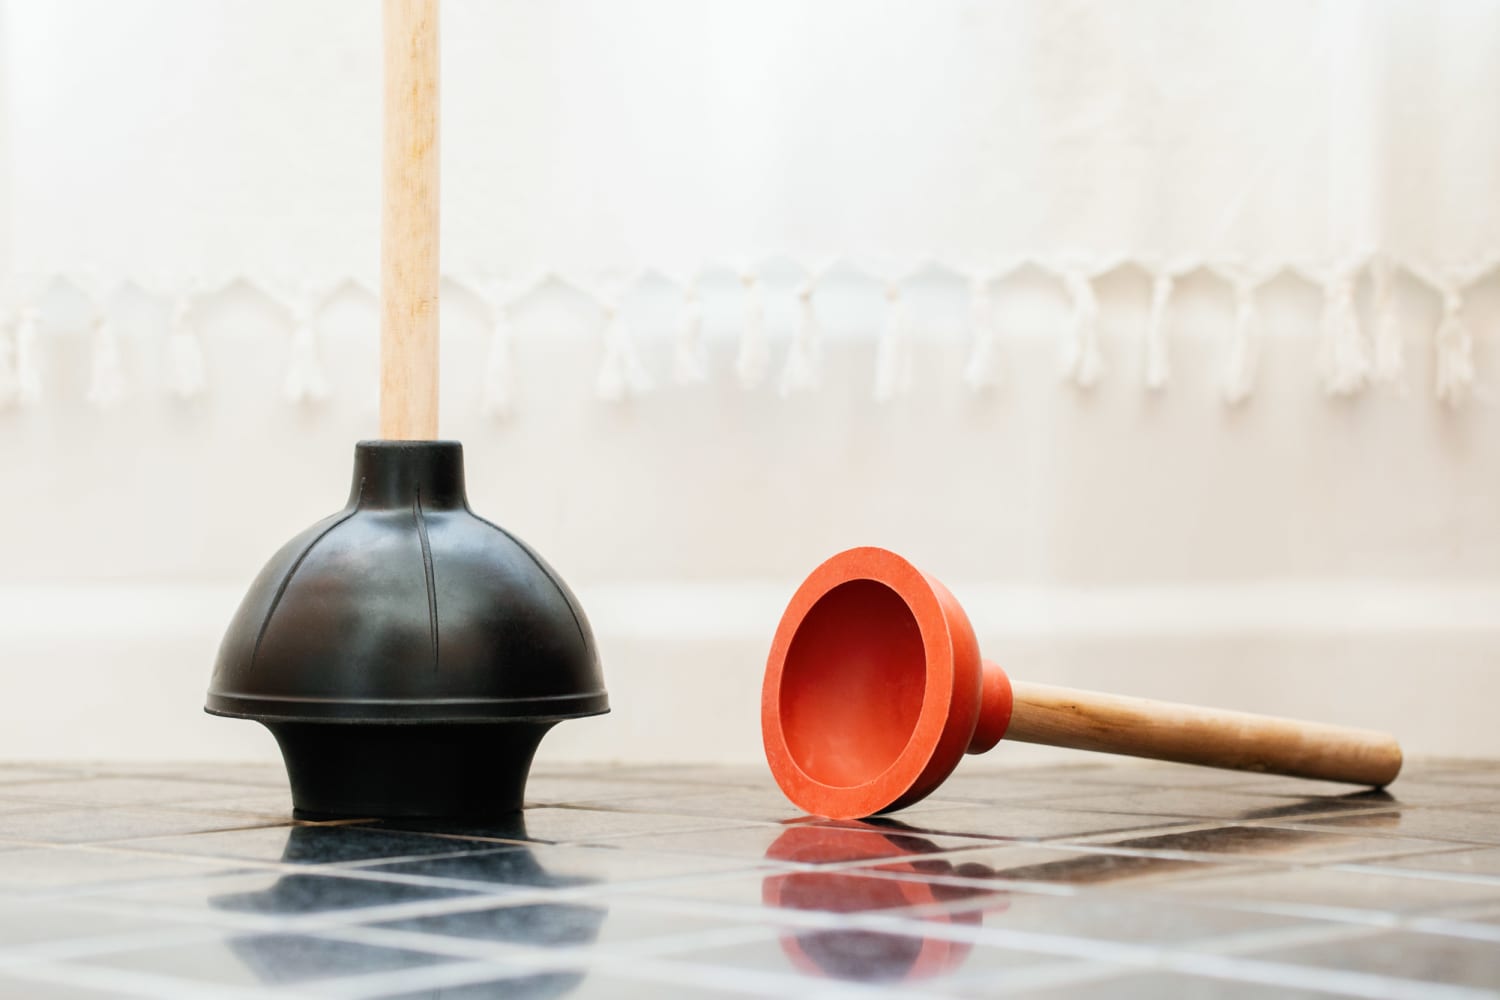 Flange Plunger vs. Toilet Plunger: Here's What to Use on Your